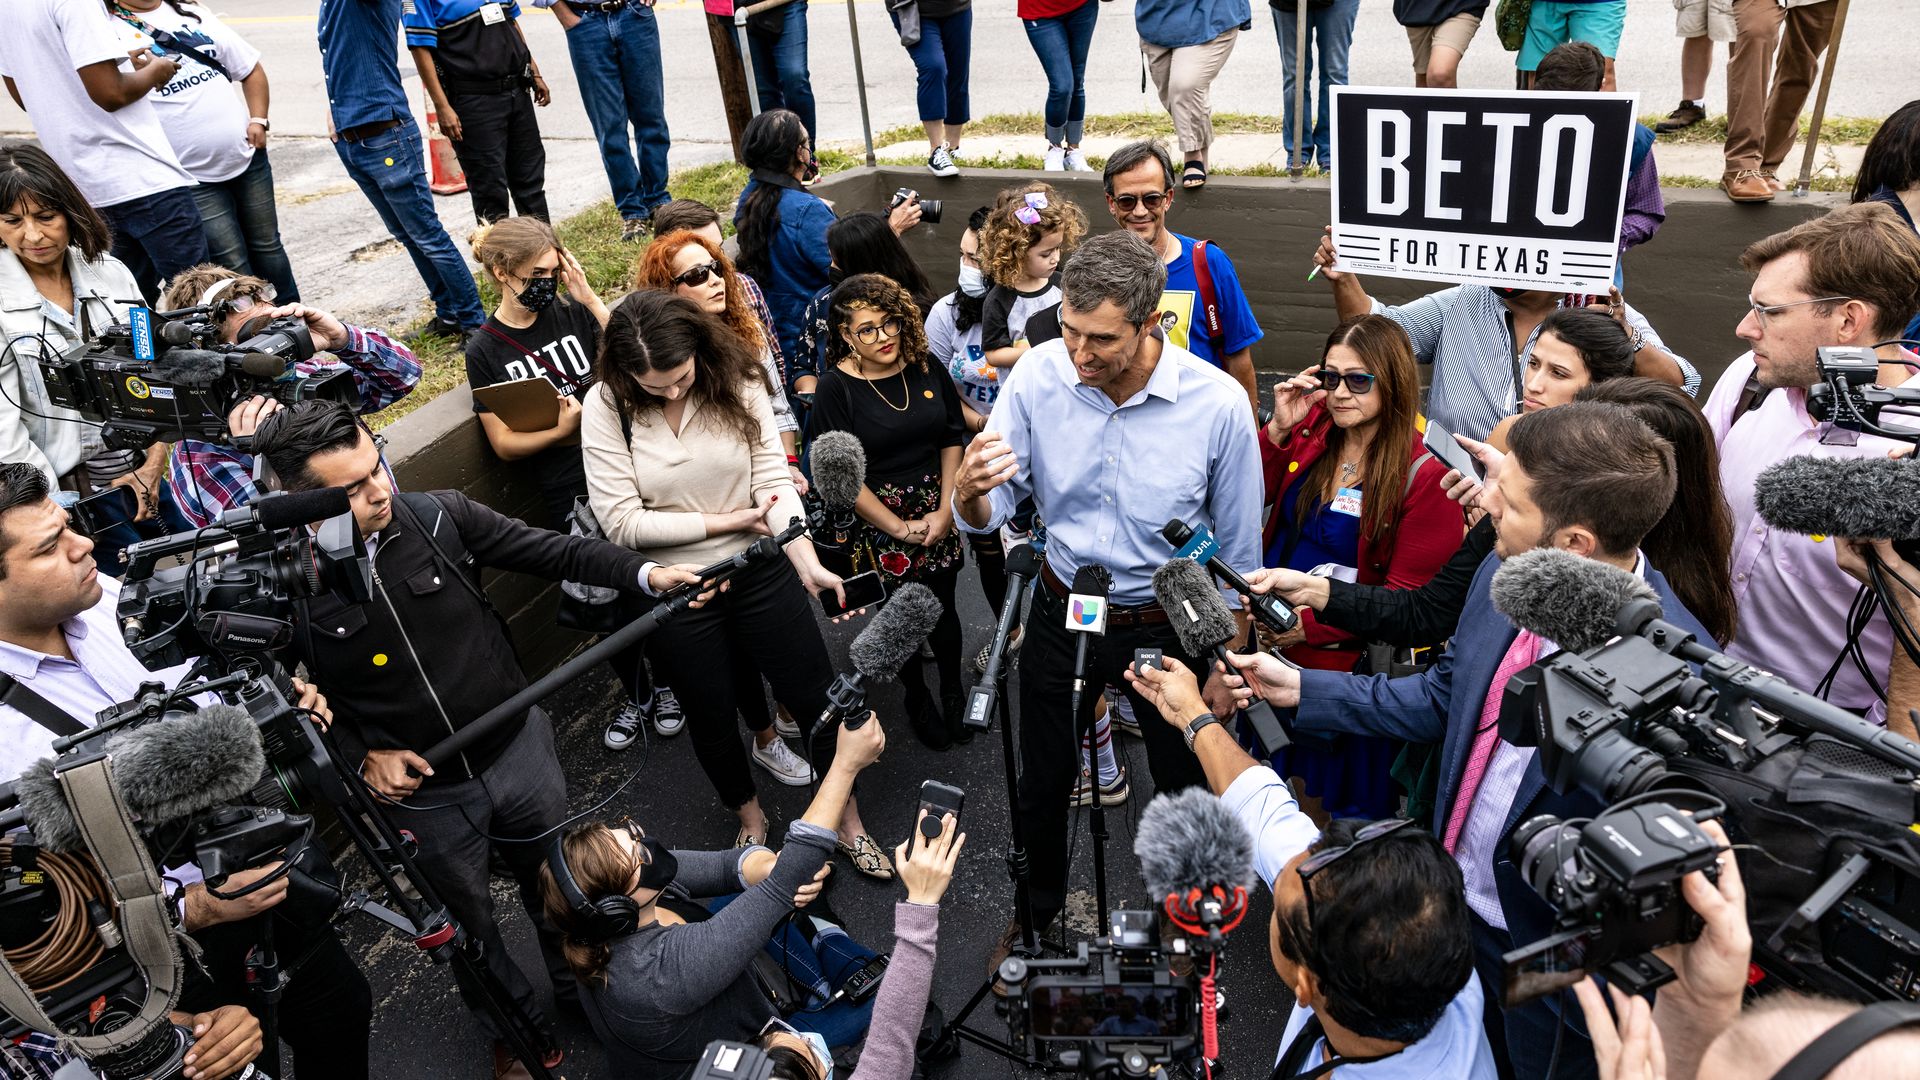 Beto surrounded by cameras and microphones